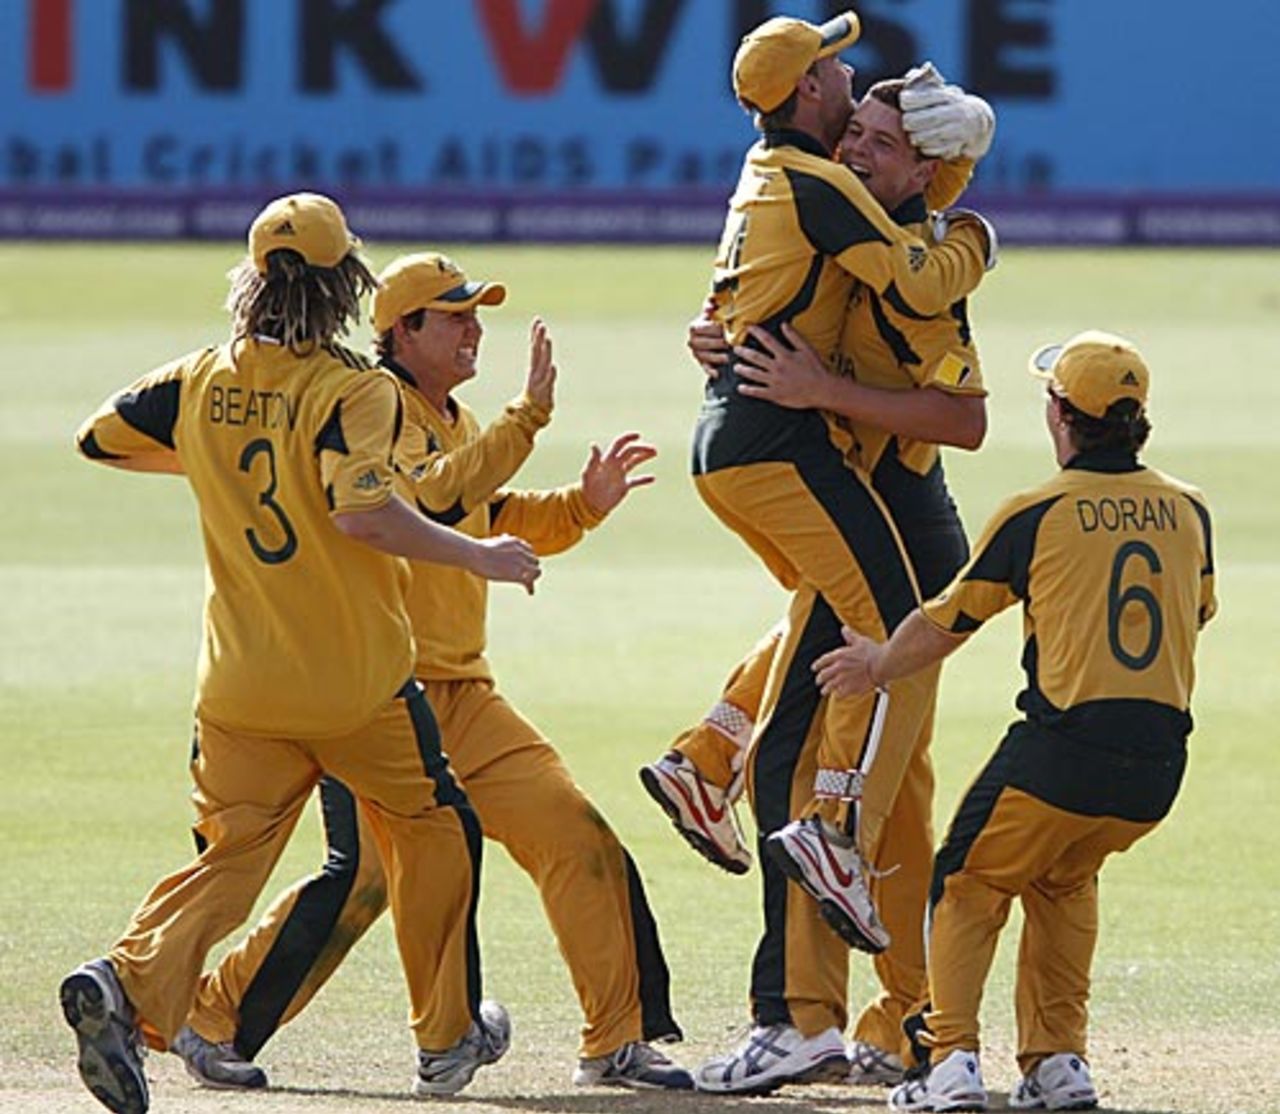 The moment of victory: The Australians run to Josh Hazlewood upon the fall of the final wicket, Australia v Pakistan, Under-19 World Cup final, Lincoln, January 30, 2010